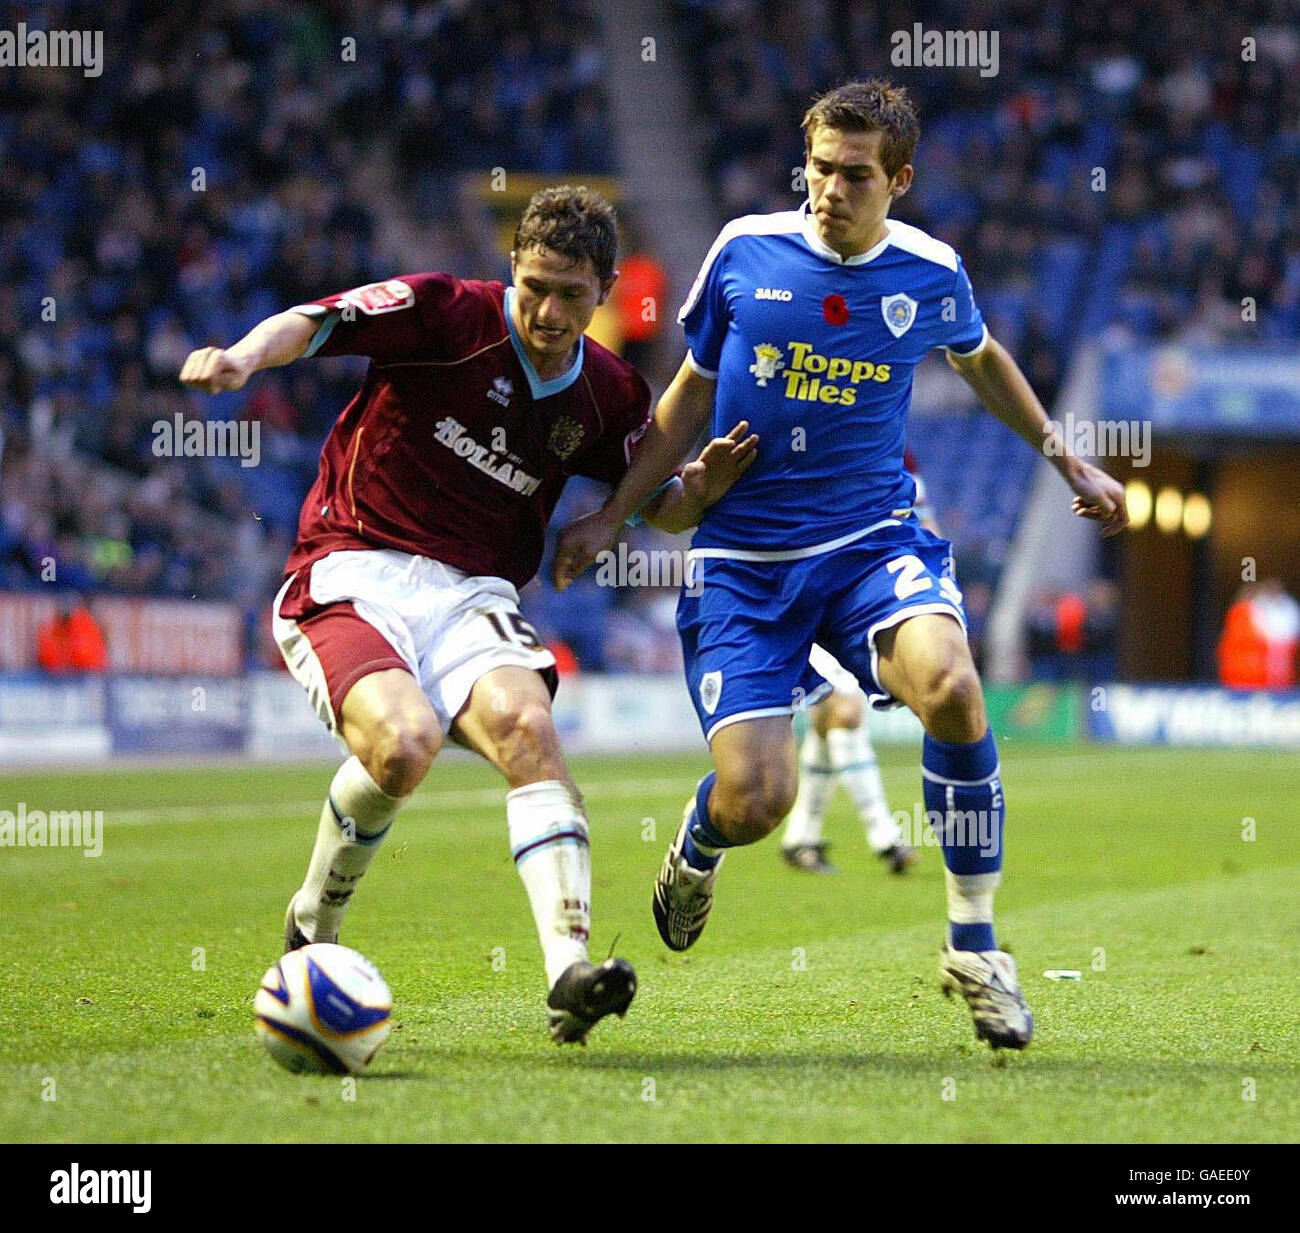 Soccer - Coca-Cola Football League Championship - Leicester City v Burnley - Walkers Stadium. Burnley John Spicer and Leicester's Joe Mattock during the Coca-Cola Football League Championship match at the Walkers Stadium, Leicester. Stock Photo